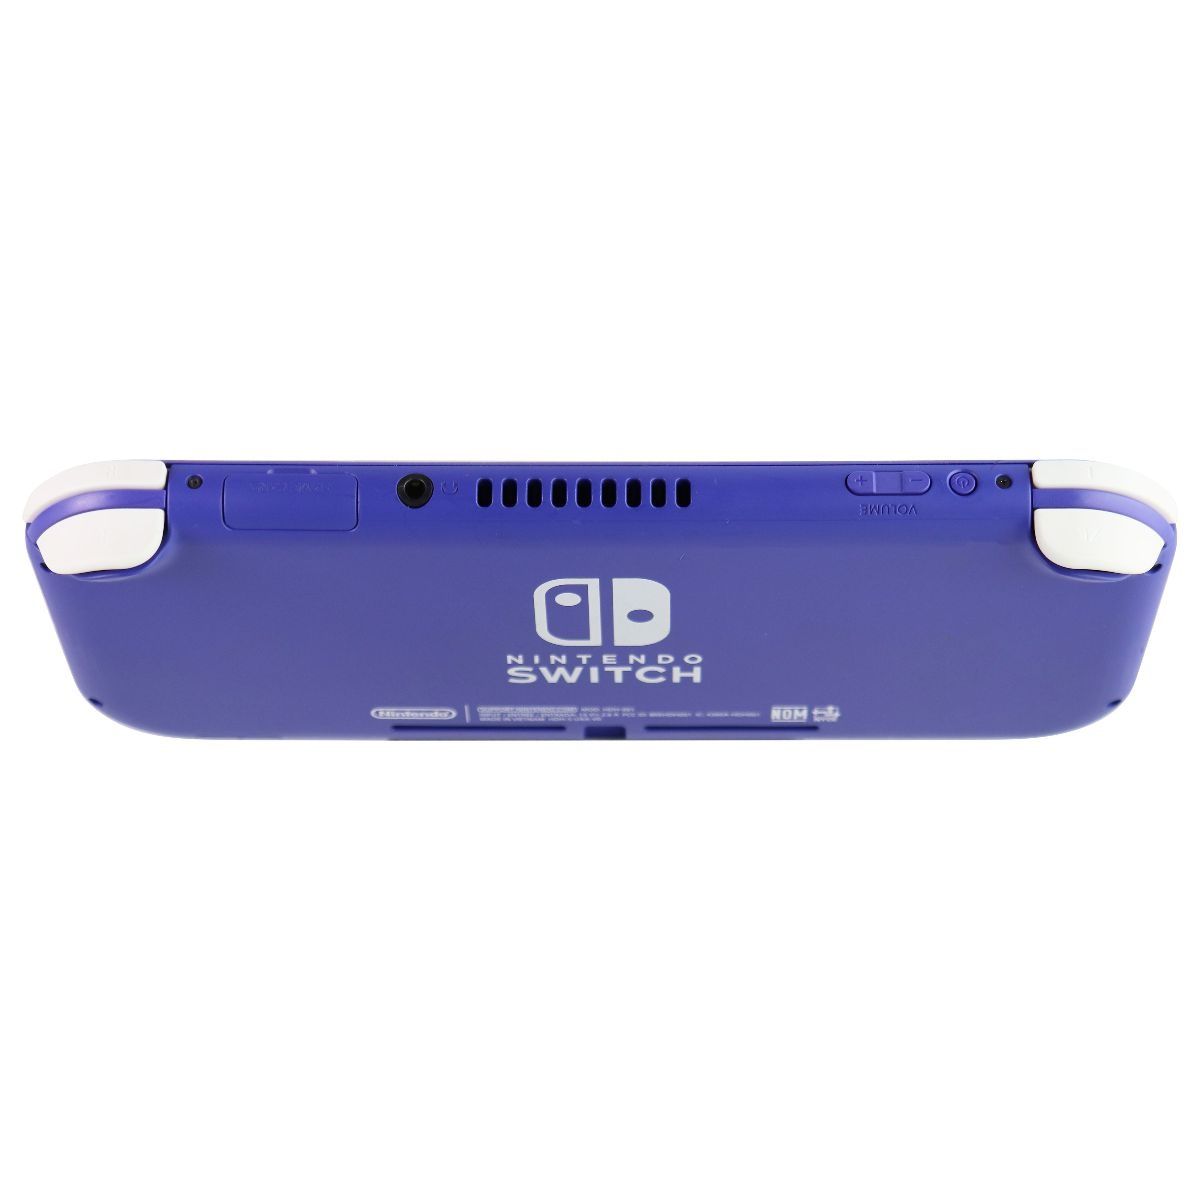 Nintendo Switch Lite Handheld Game Console - Blue (HDH-001) Gaming/Console - Video Game Consoles Nintendo    - Simple Cell Bulk Wholesale Pricing - USA Seller